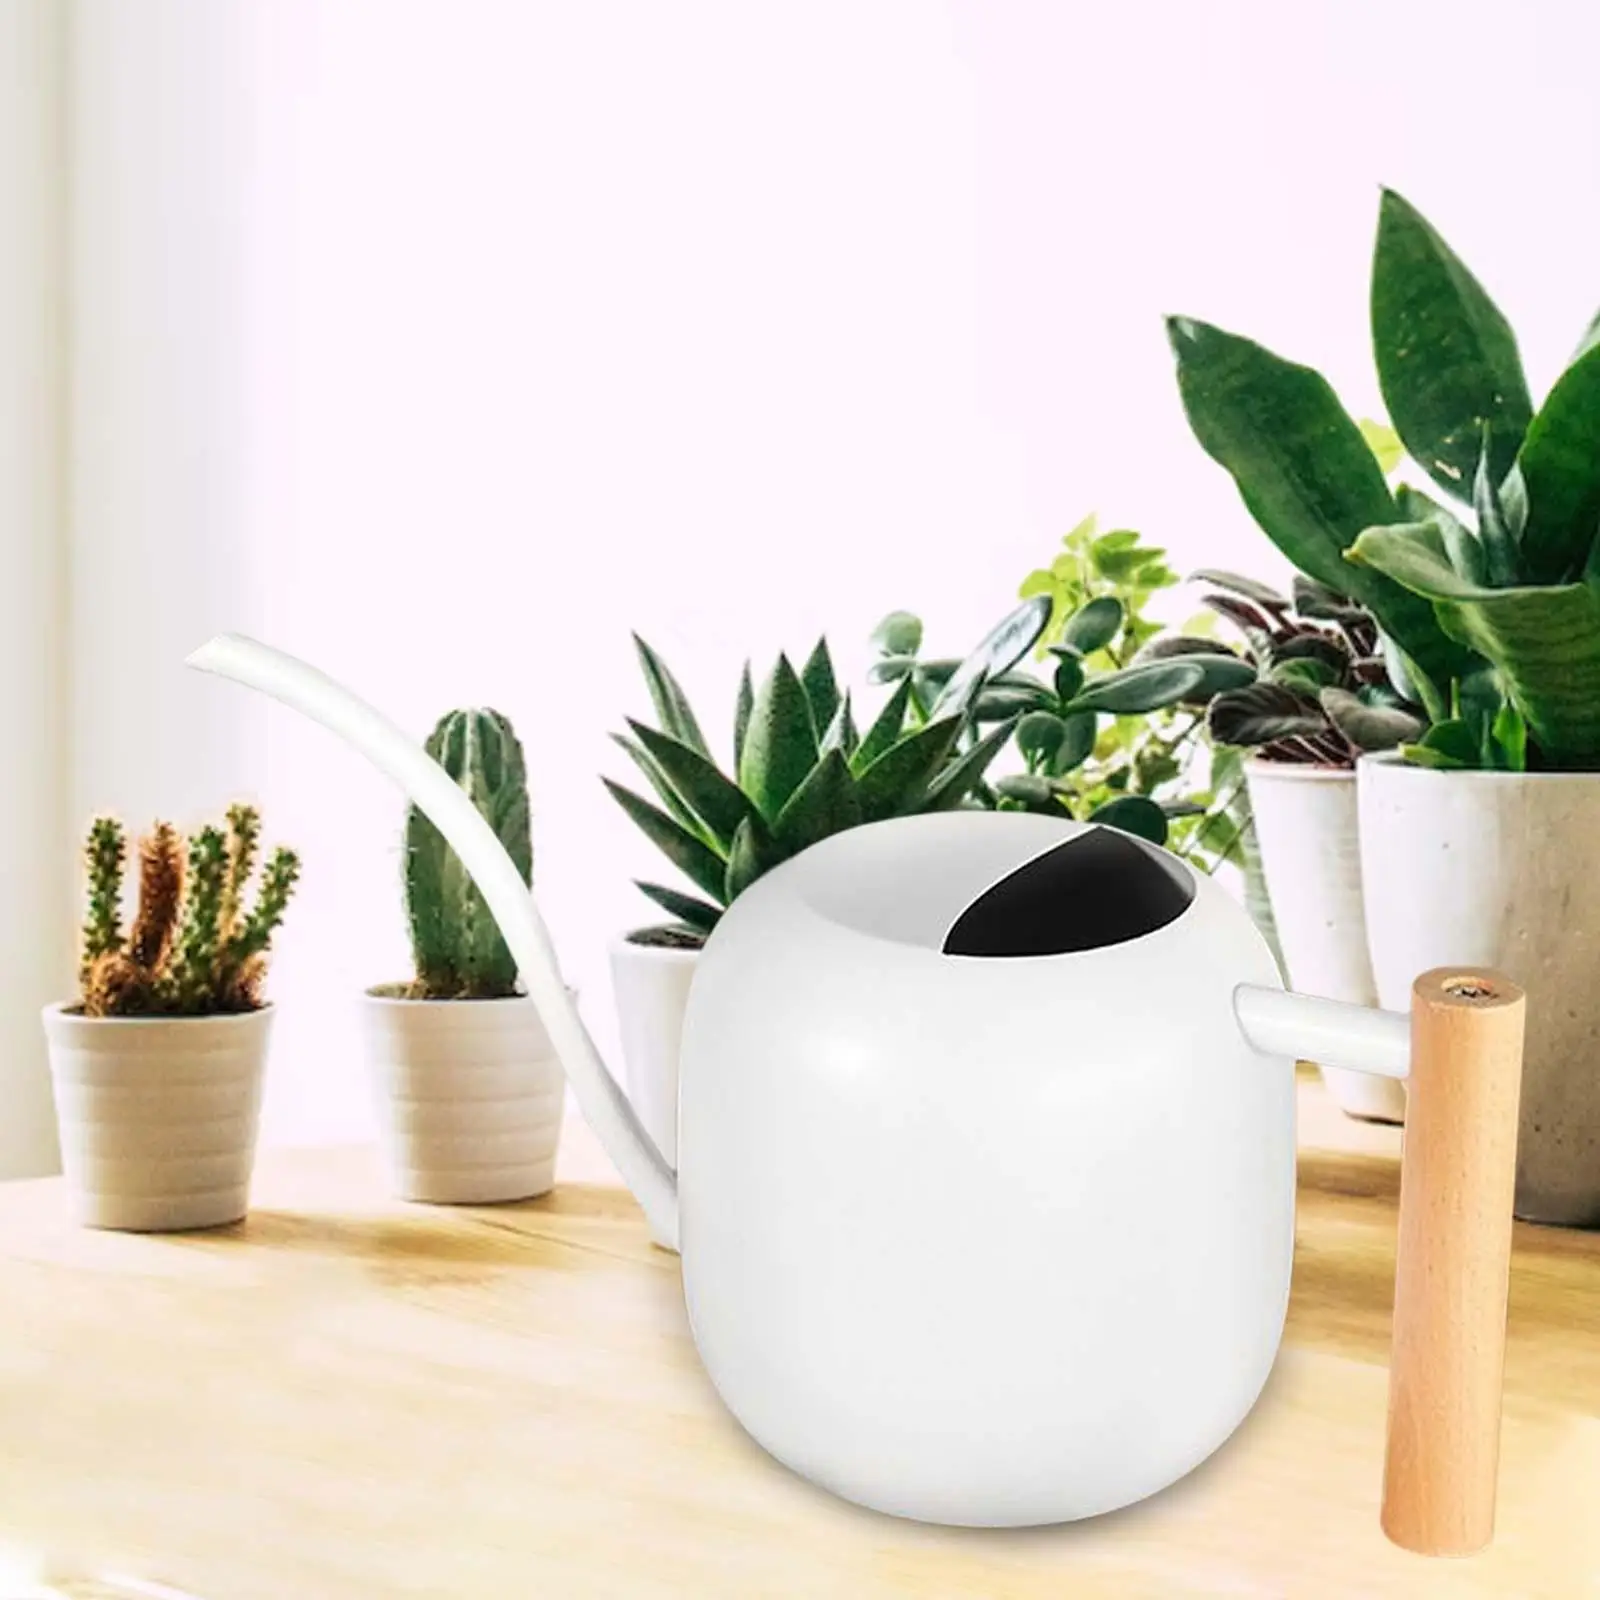 Stainless Steel Watering Can Long Mouth Wooden Handle Watering Flower Kettle for Home Outdoor Shower Yard Decorative